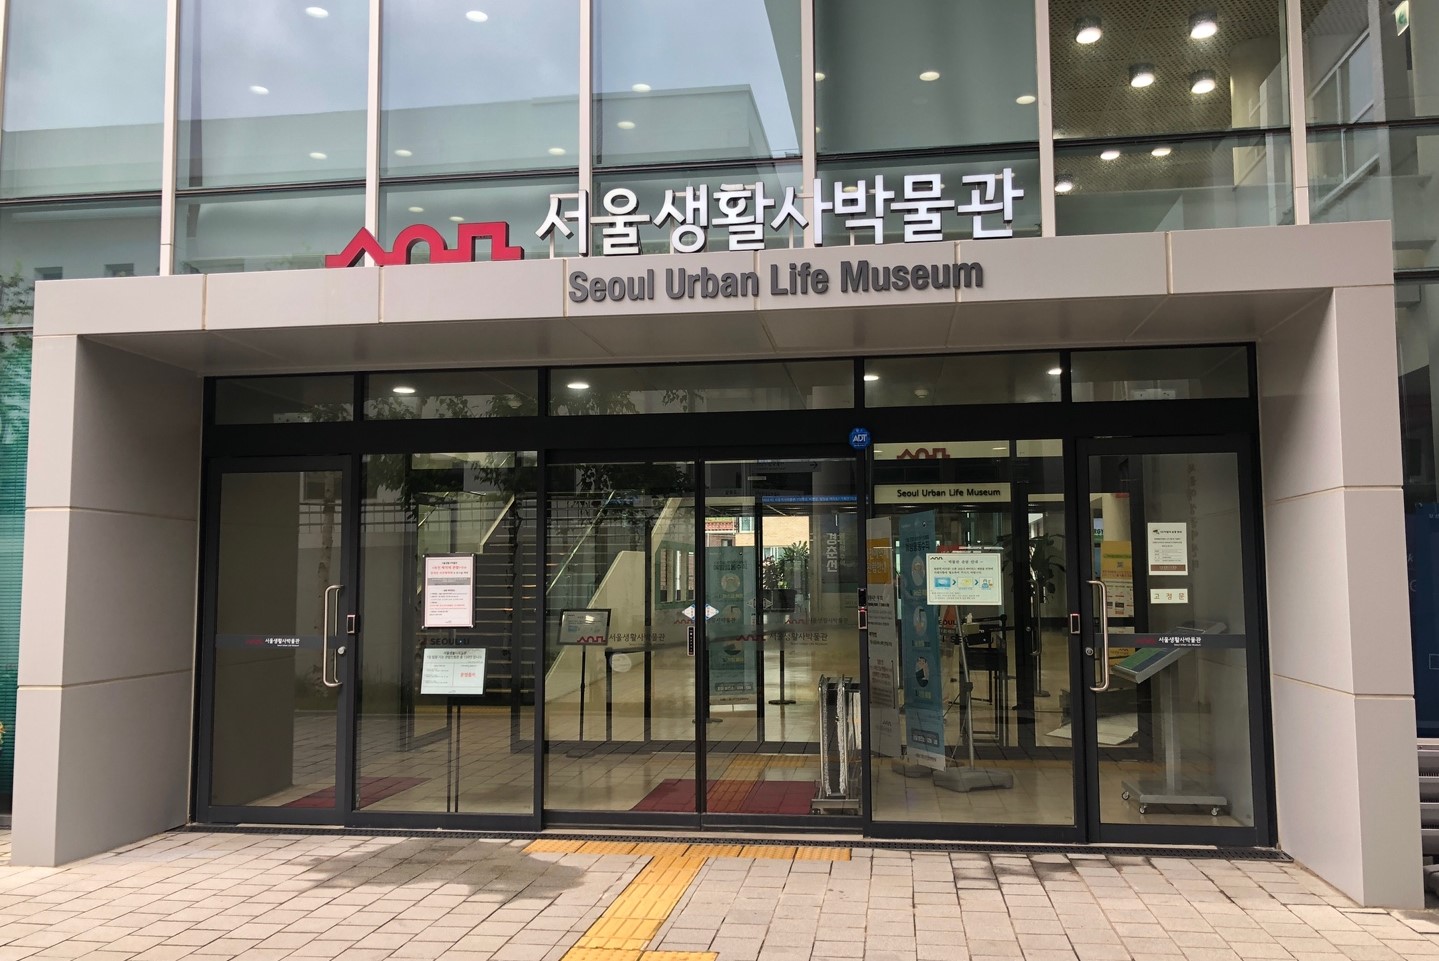 Seoul Urban Life Museum 0 : The main entrance of the museum made out of glass doors
